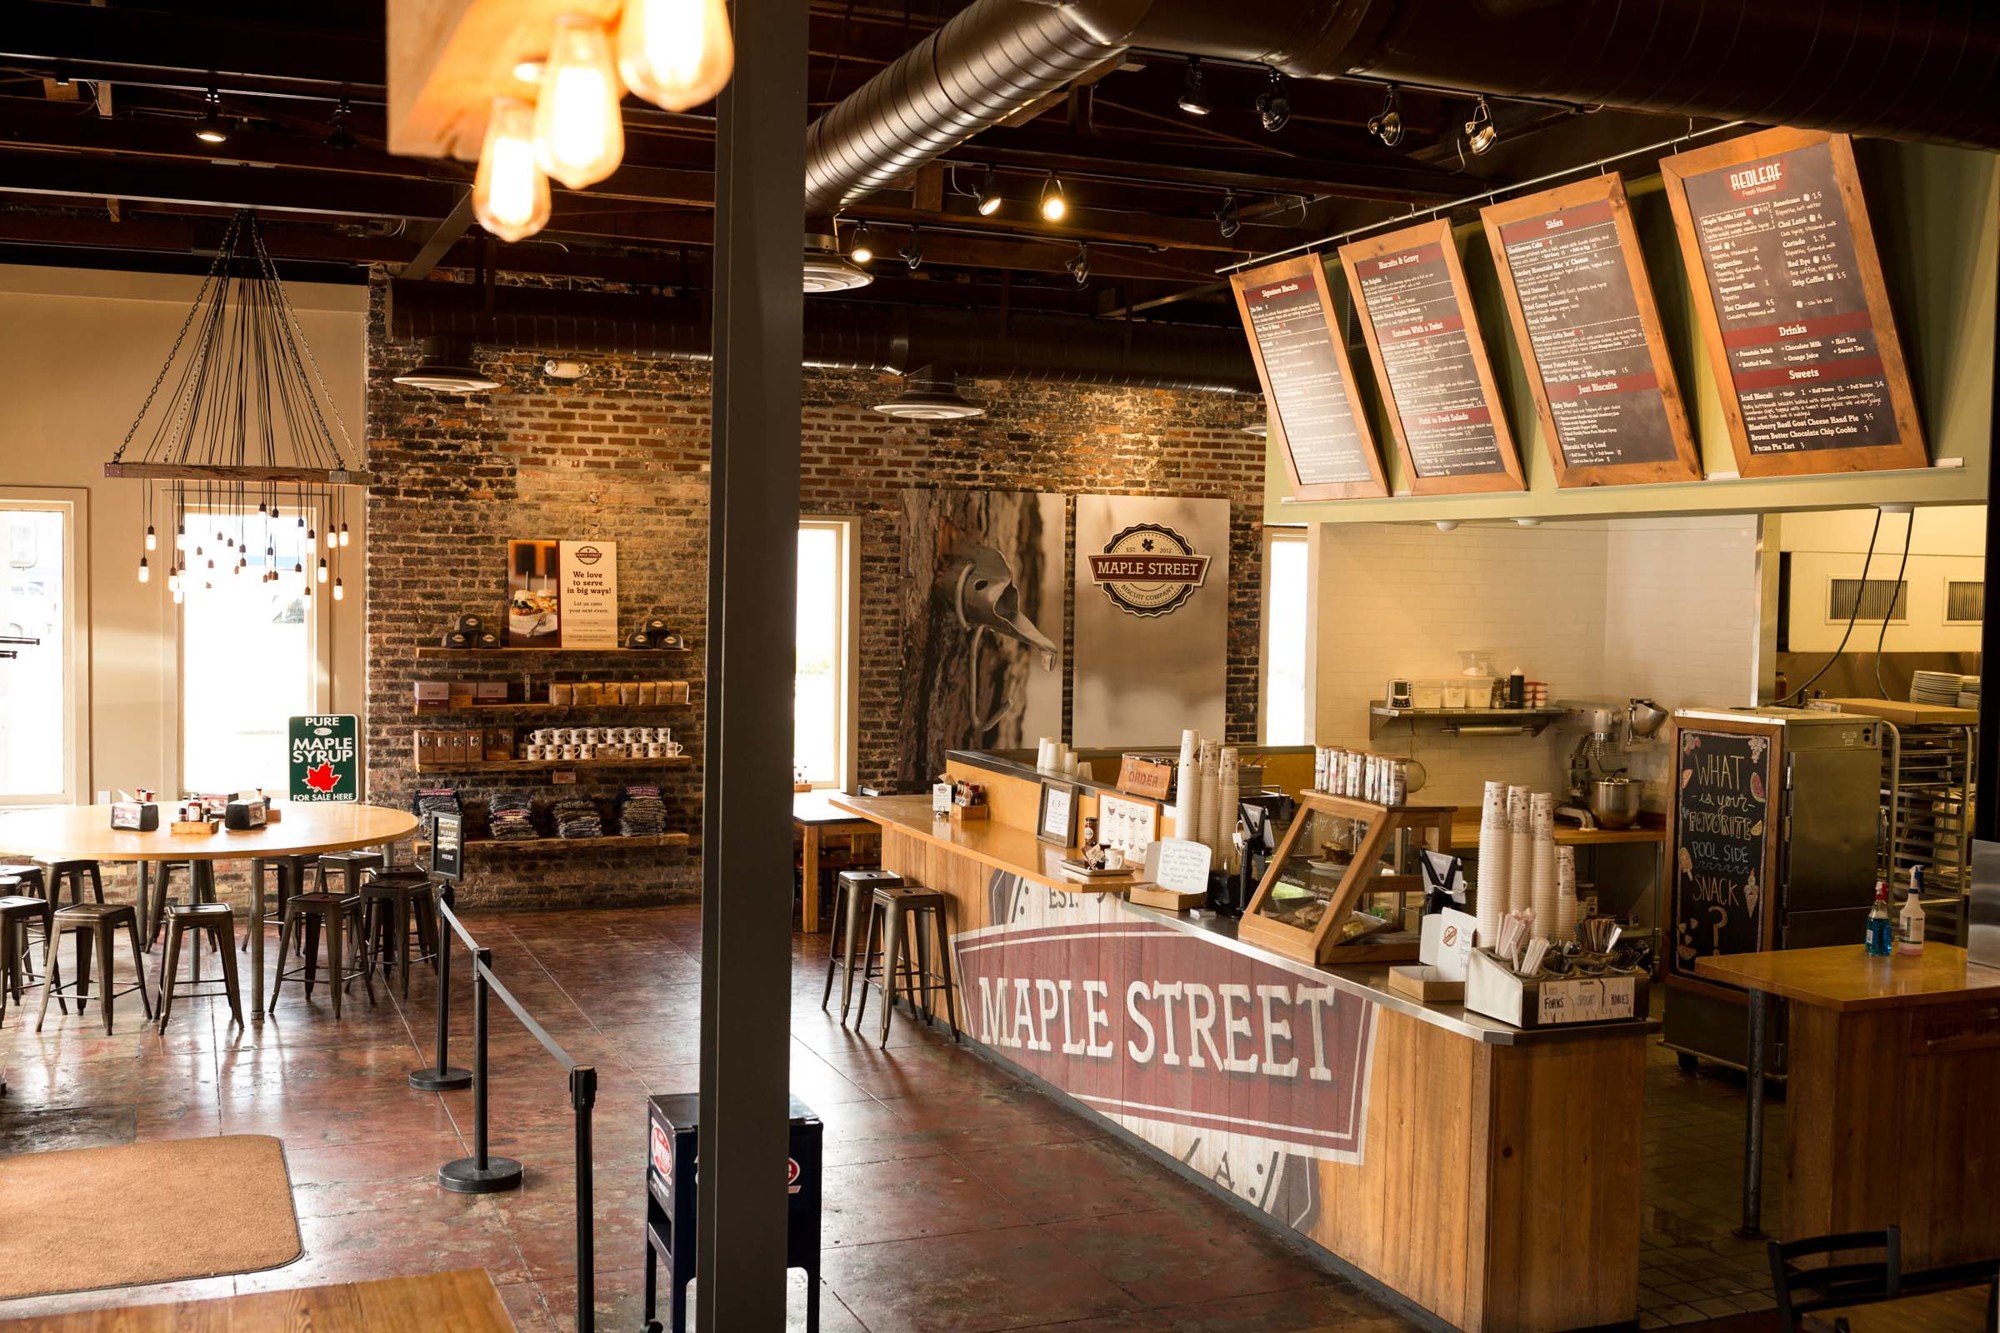 Cracker Barrel Old Country Store paid $36 million for Maple Street Biscuit Company Inc., which has 33 restaurants in seven states.